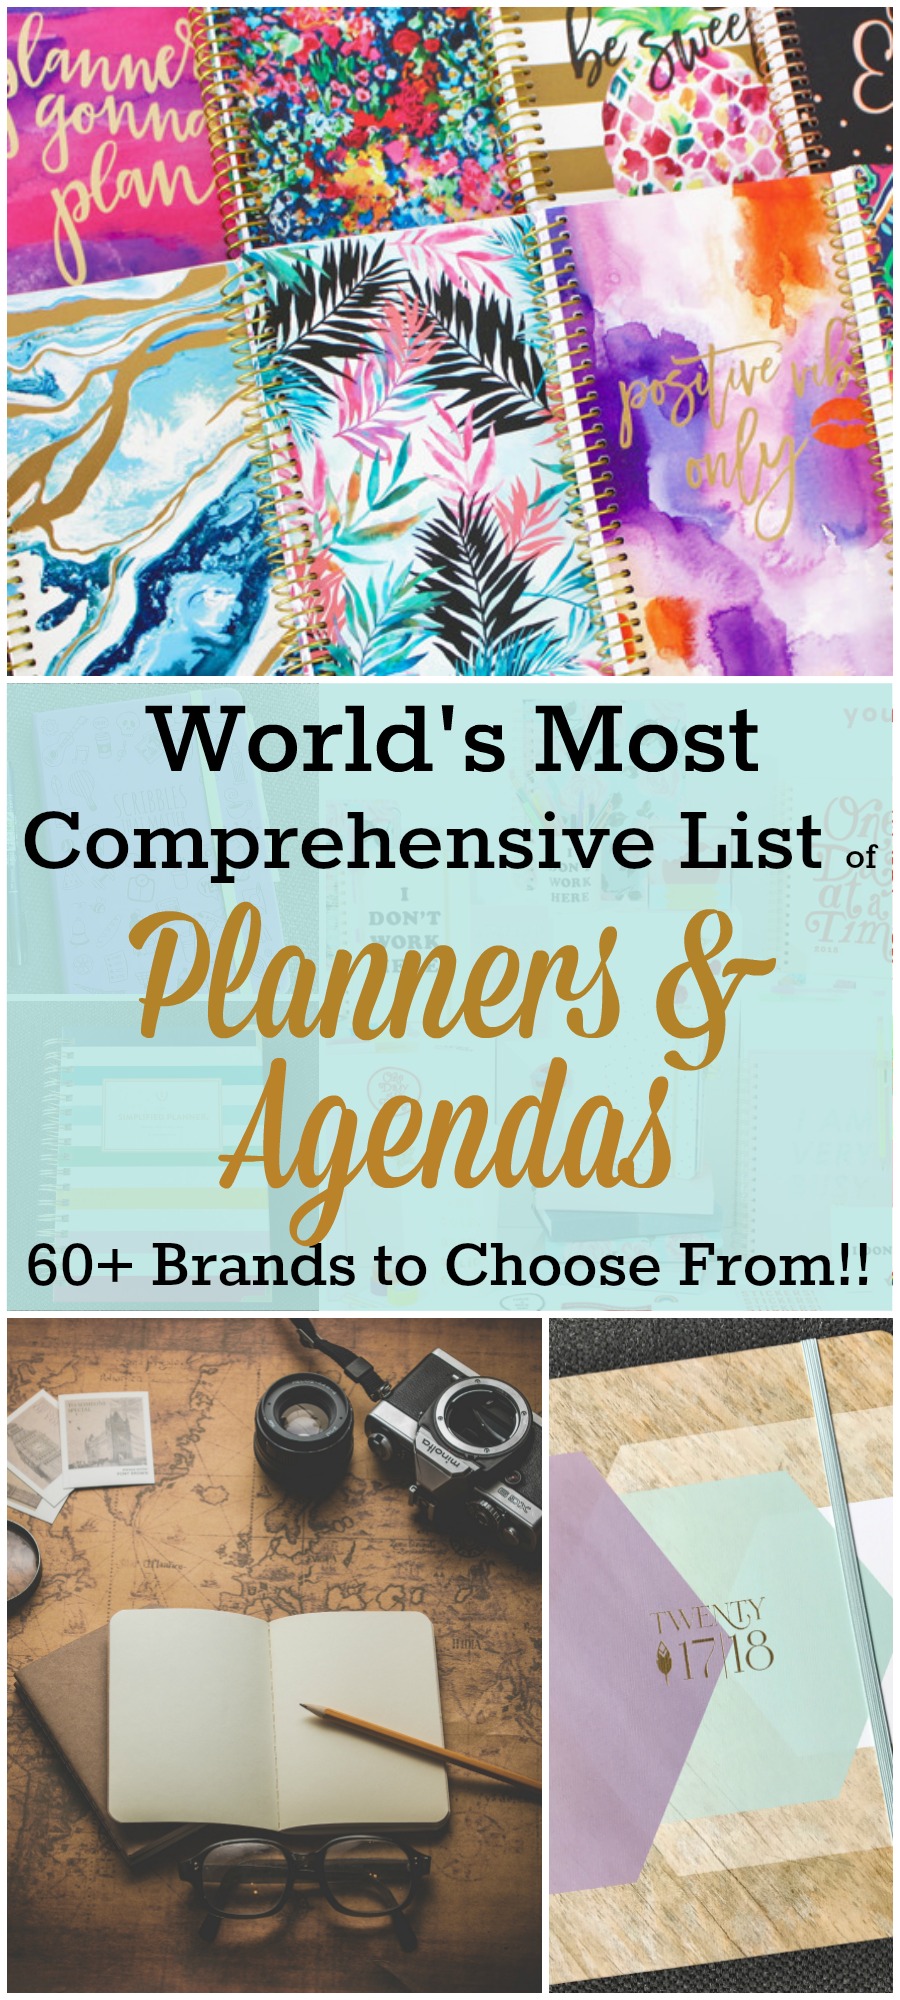 The World’s Most Comprehensive List of Planners